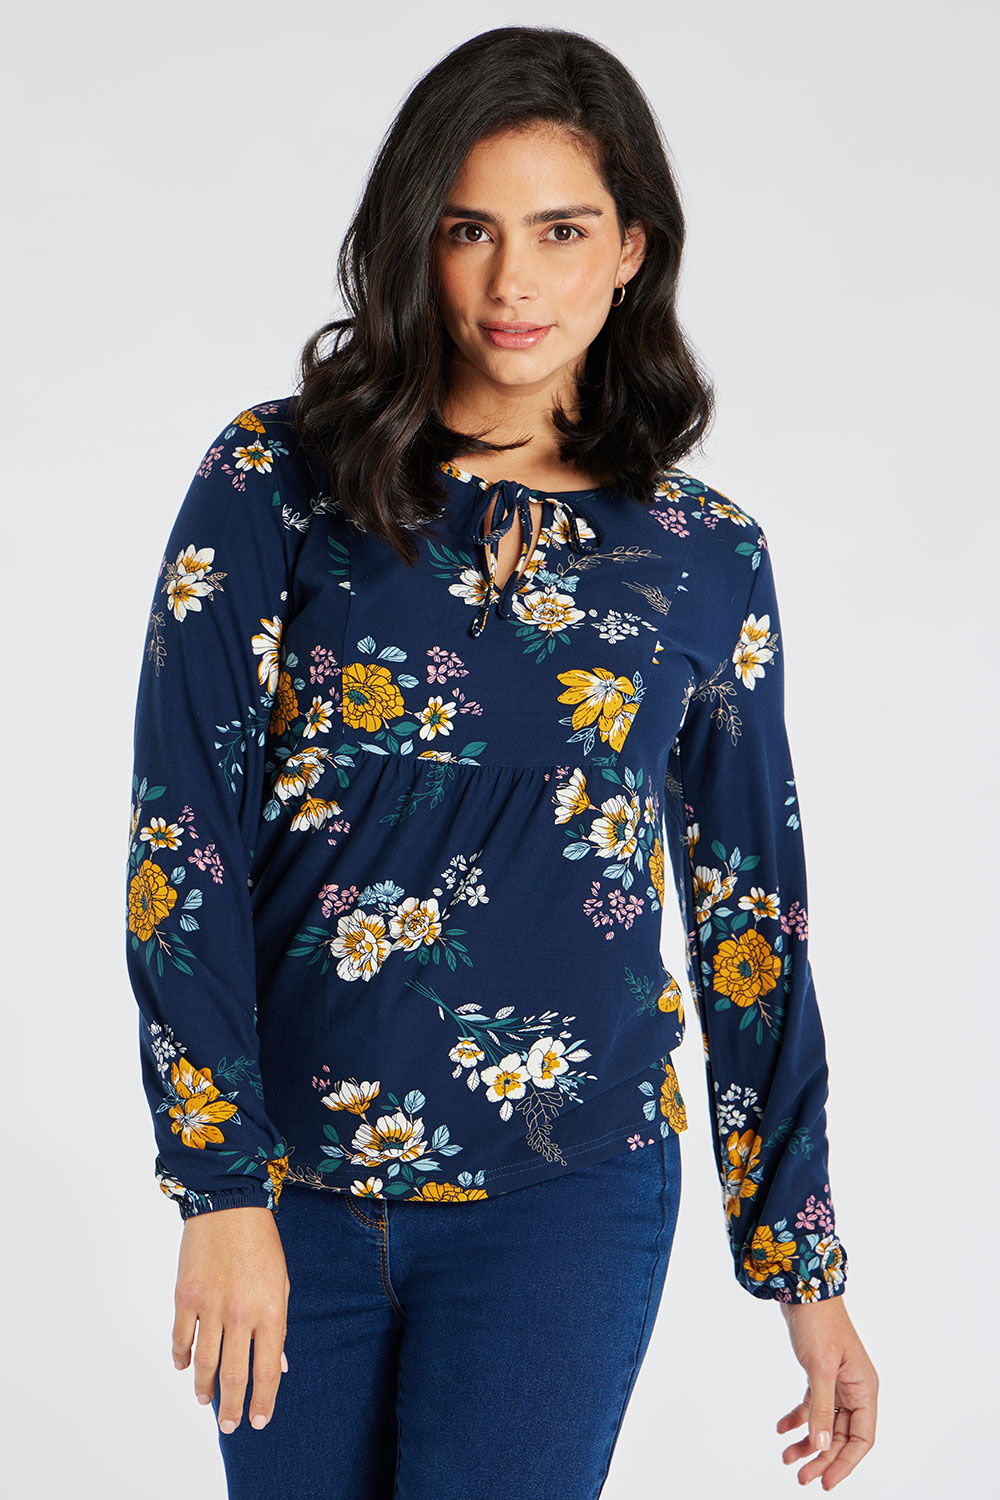 Bonmarche Navy Long Sleeve Spaced Floral Print Soft Touch Top, Size: 10